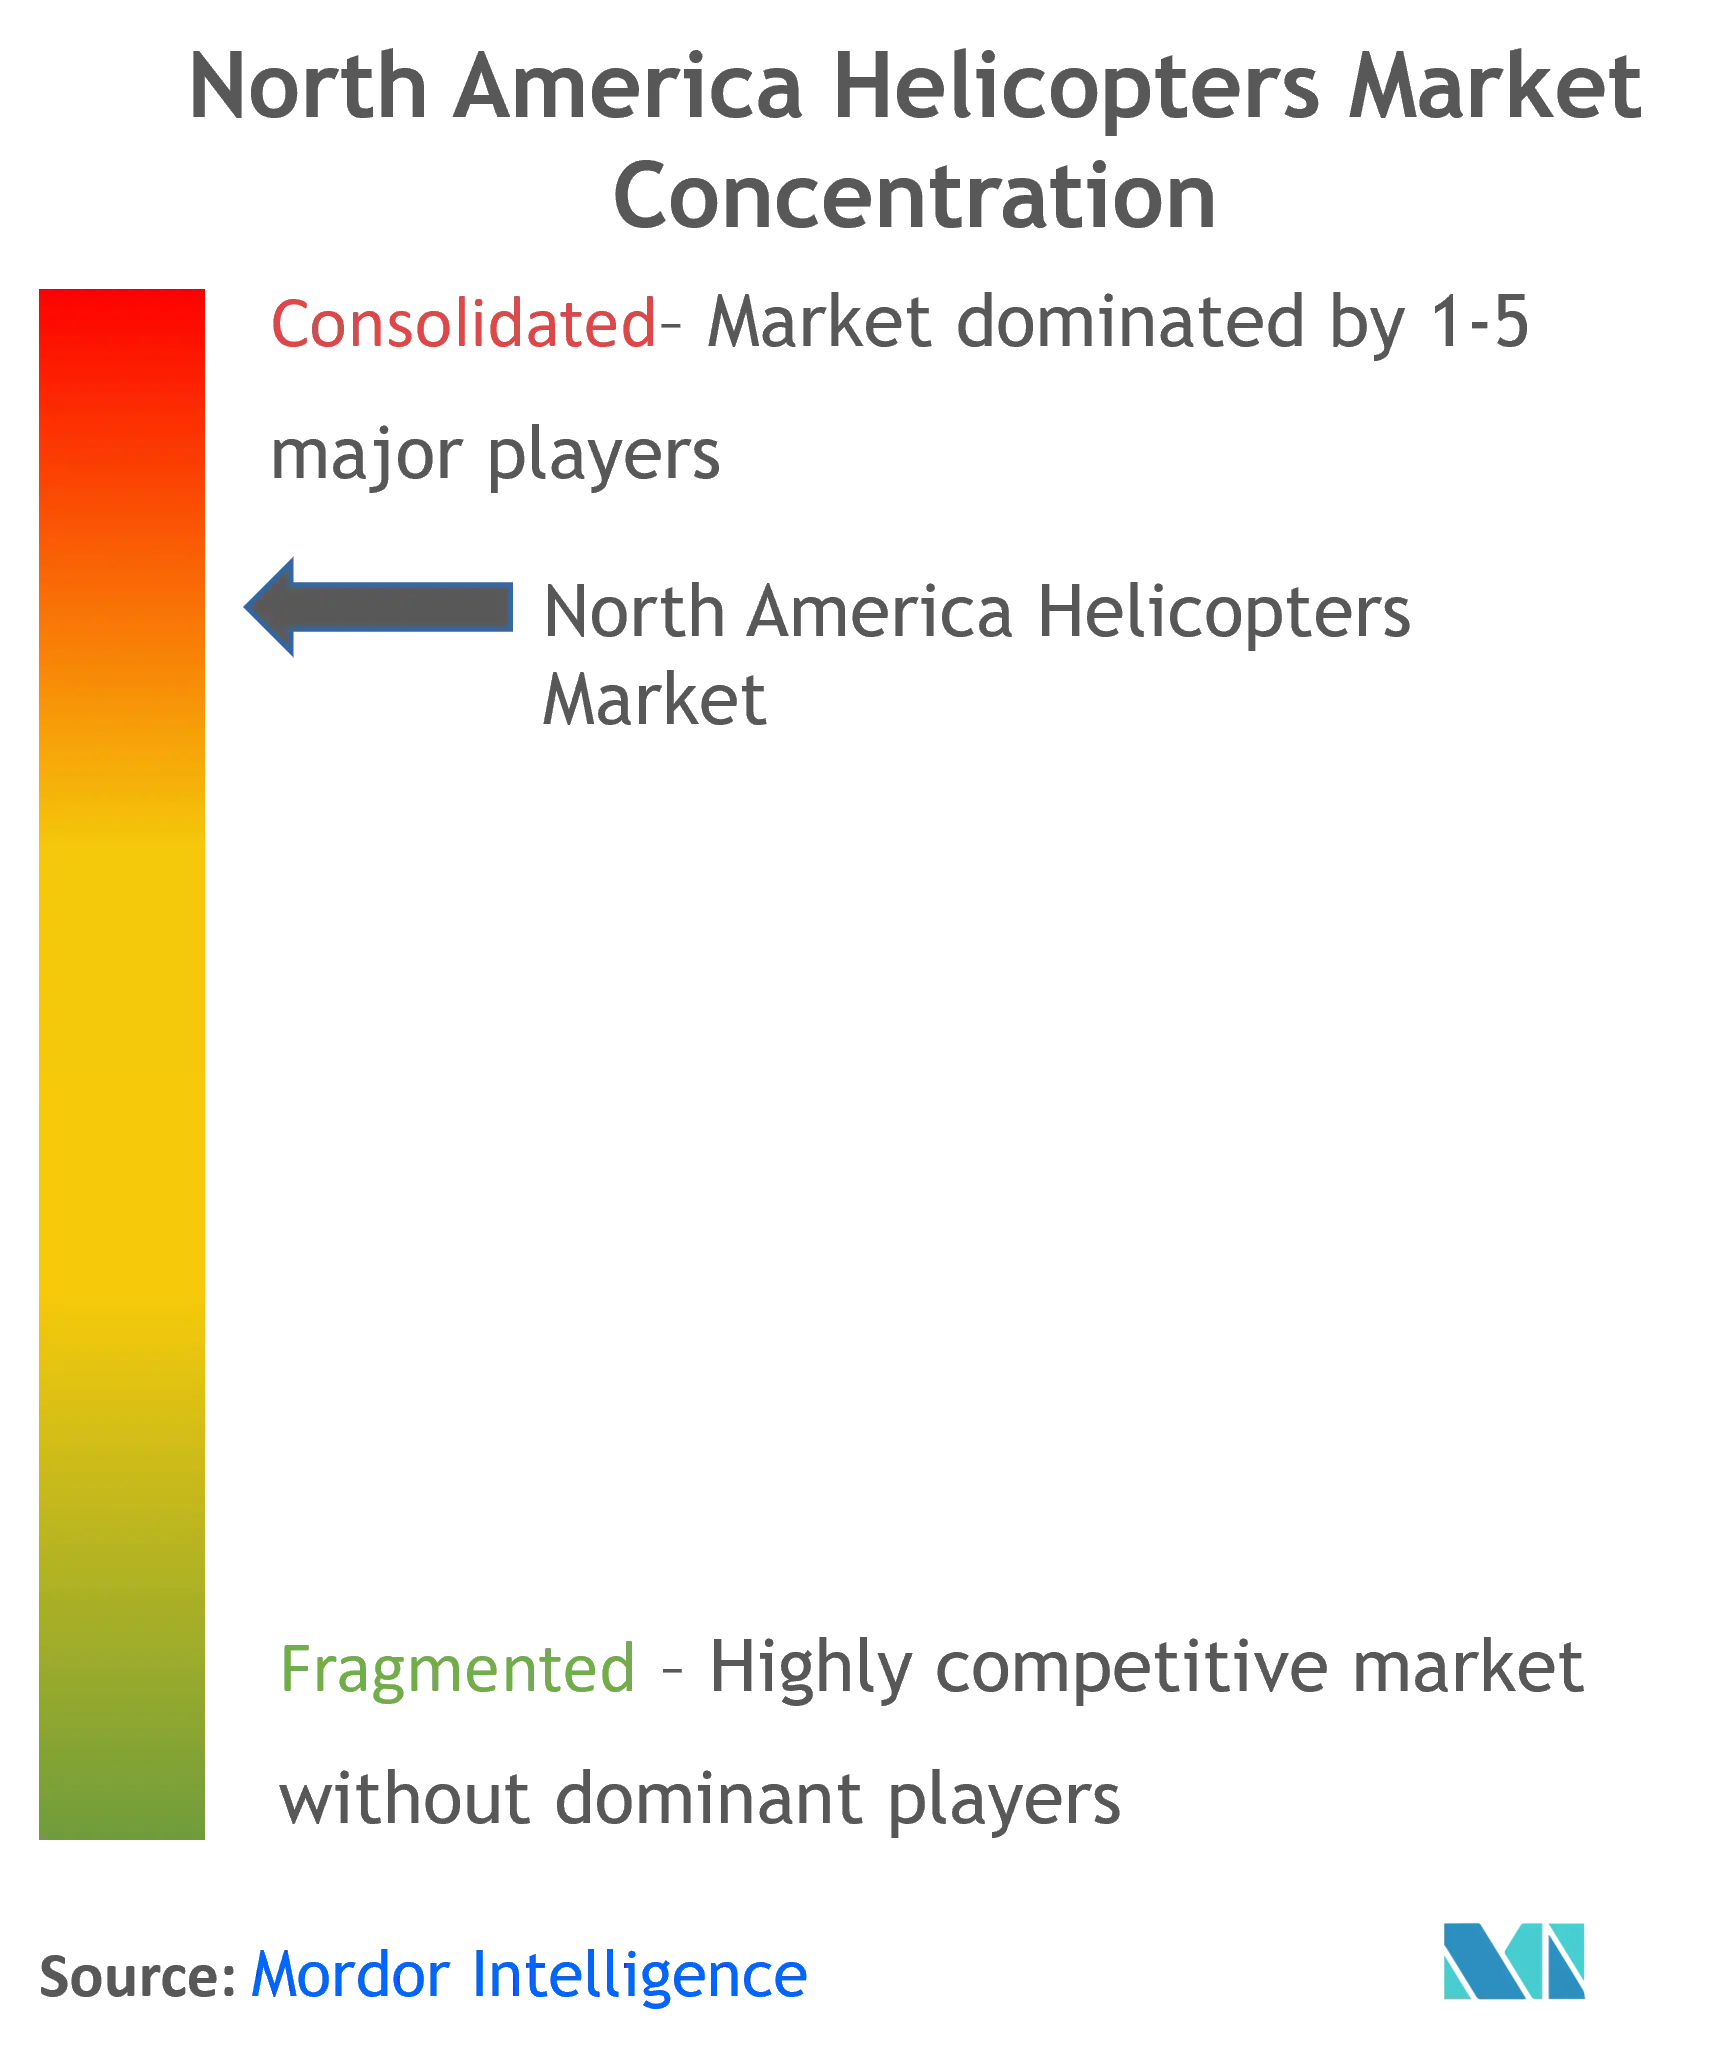 North America Helicopters Market Concentration